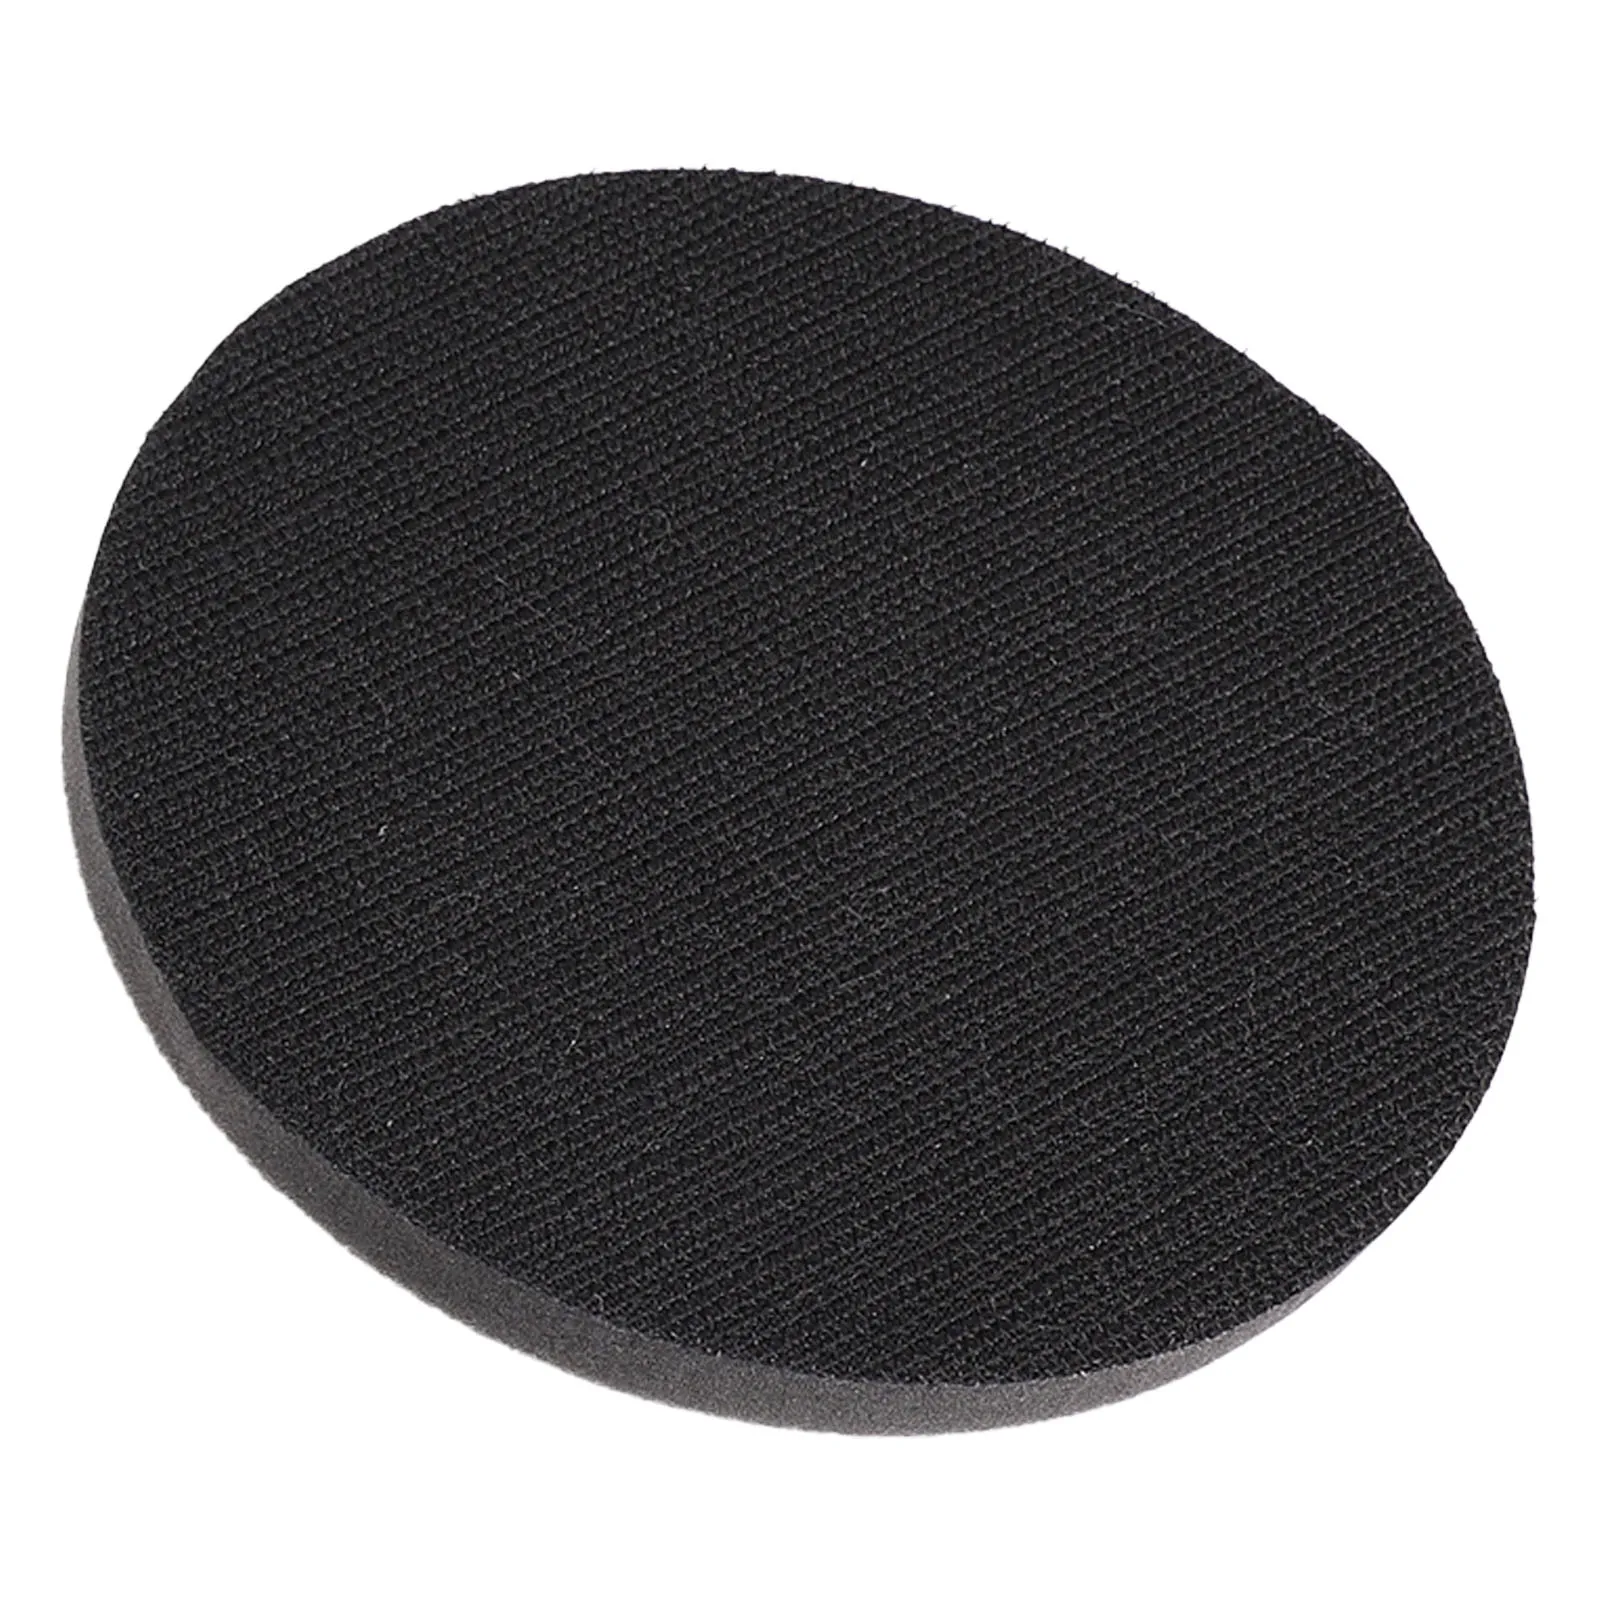 For Uneven Surface Buffering Pad Power Tools Accessories Convenient Replacement Interface Pad Surface Polishing sponge pool cue polishing tools supplies cleaning pad accessories convenient cleaner billiard